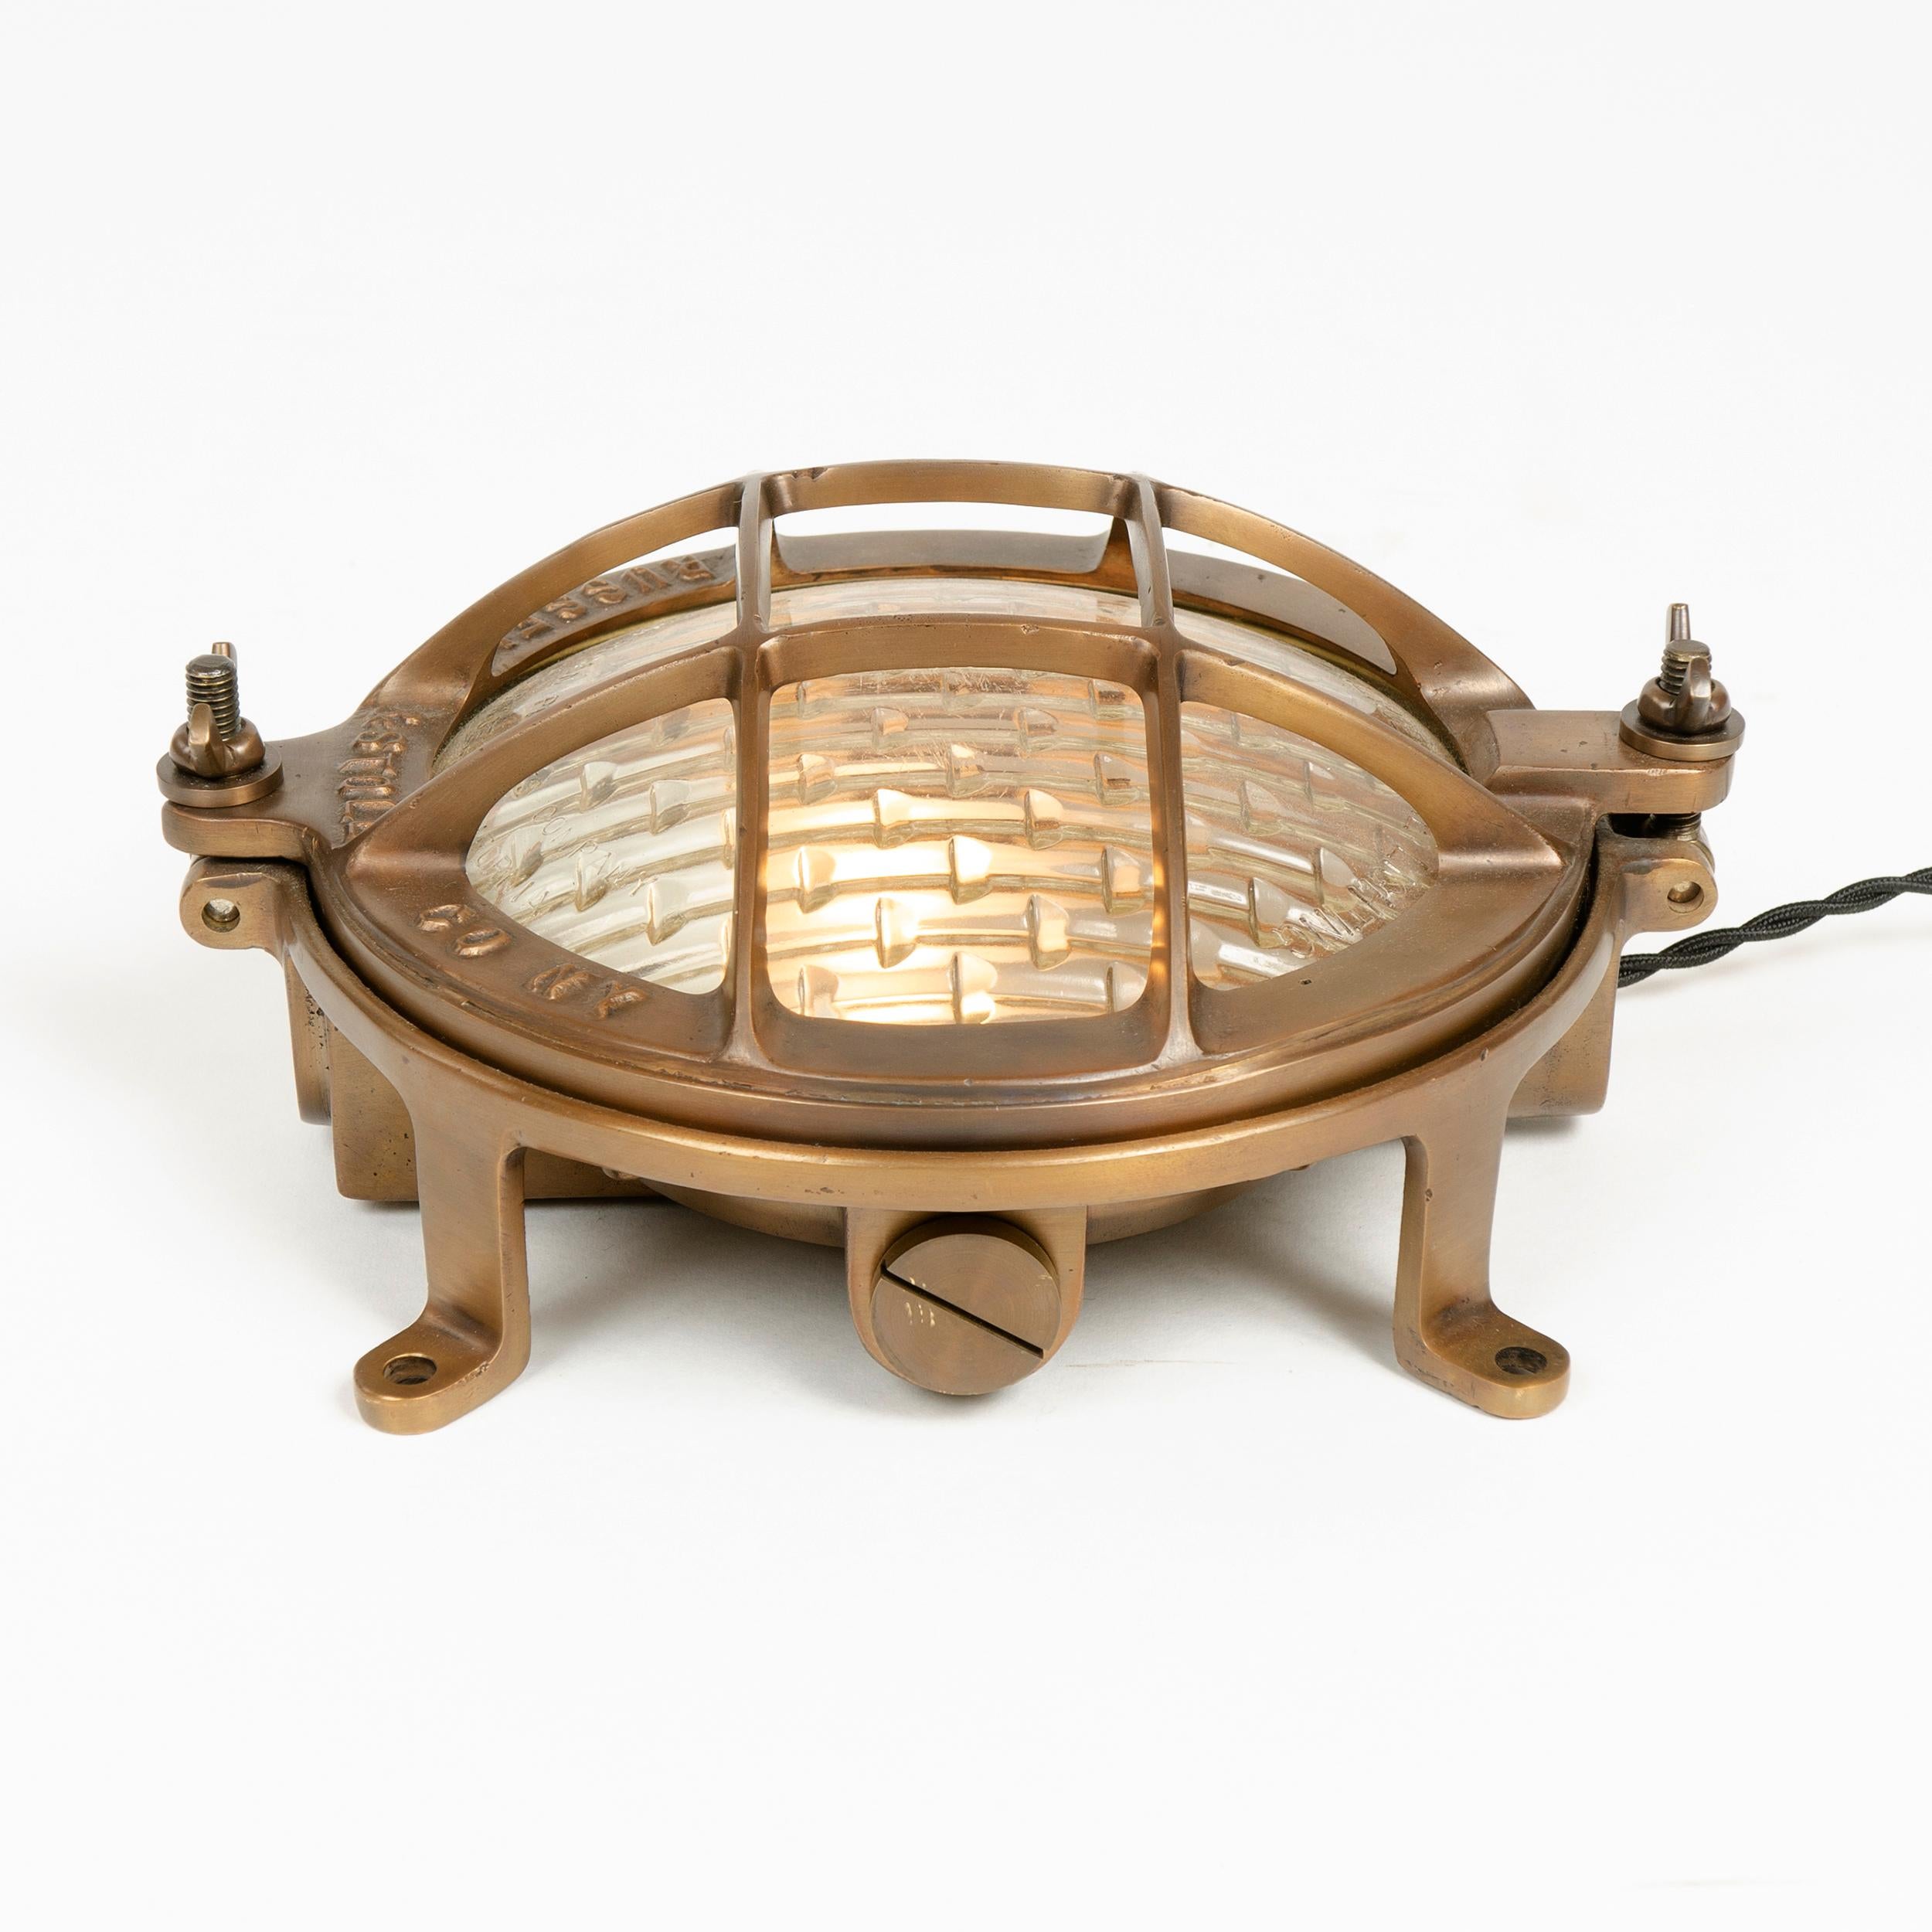 An excellent cast bronze sconce or ceiling mount lamp on a footed base with a glass dome protected by a well designed bronze cage.